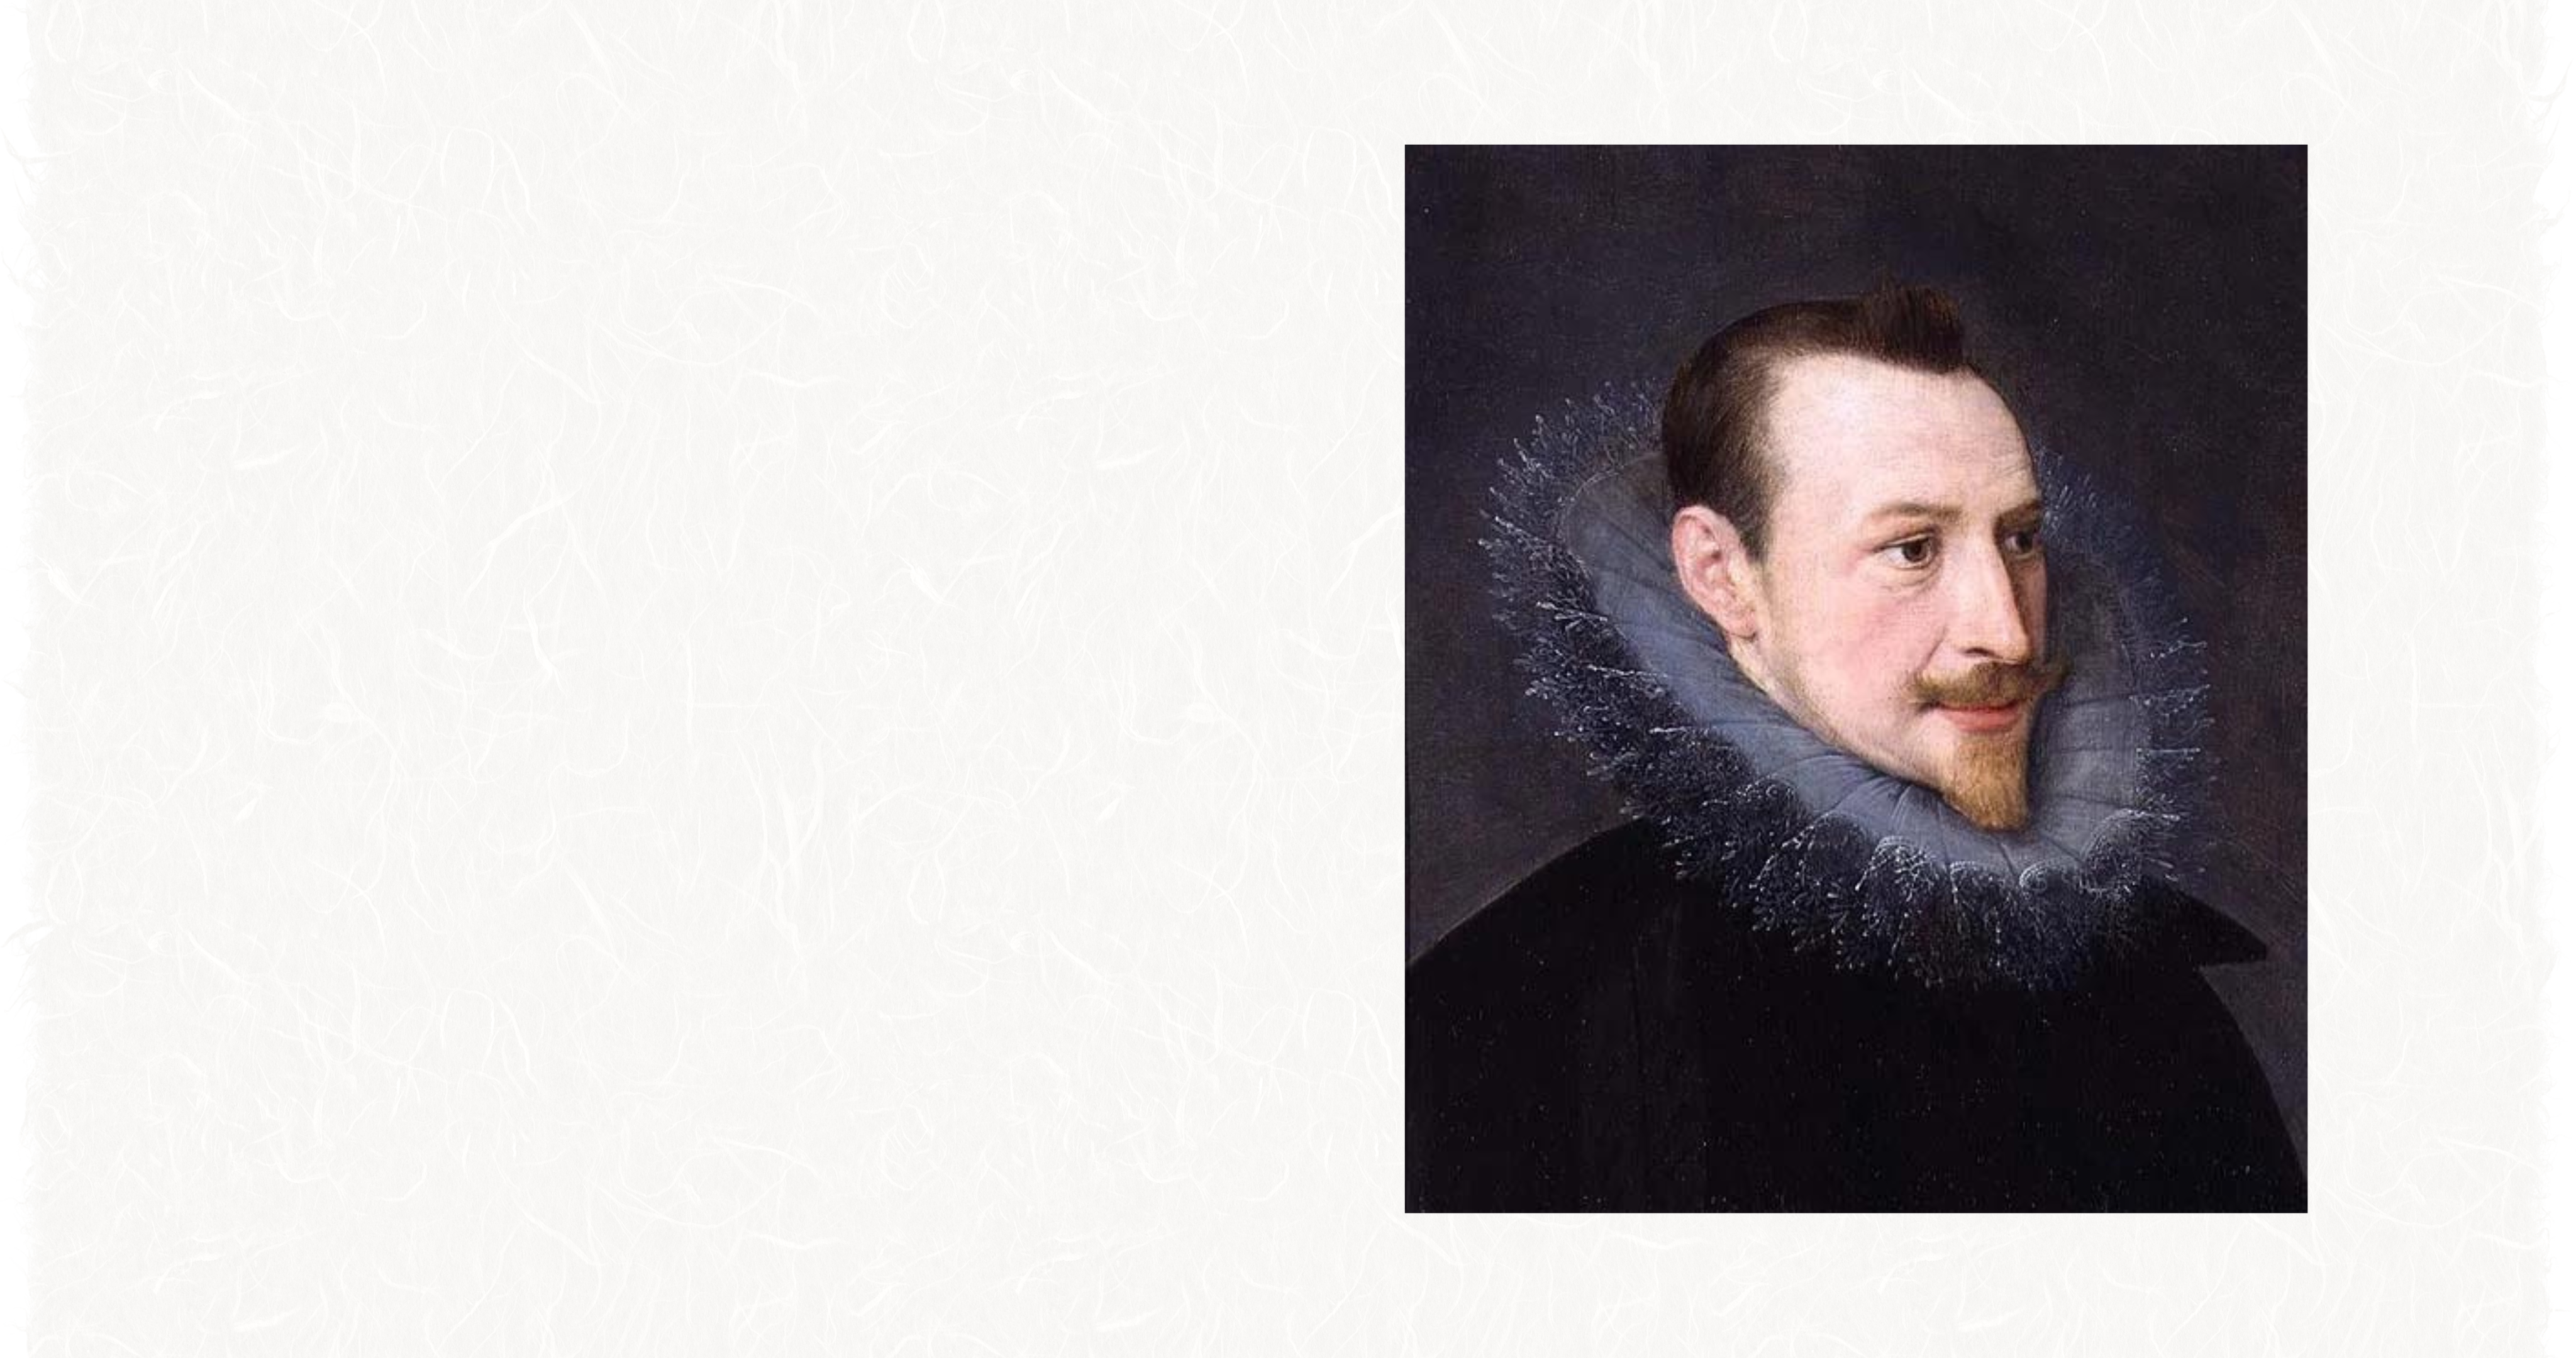 Bust portrait of a gentleman, said to be Edmund Spenser. He is finely dressed, with a plush navy ruff. 